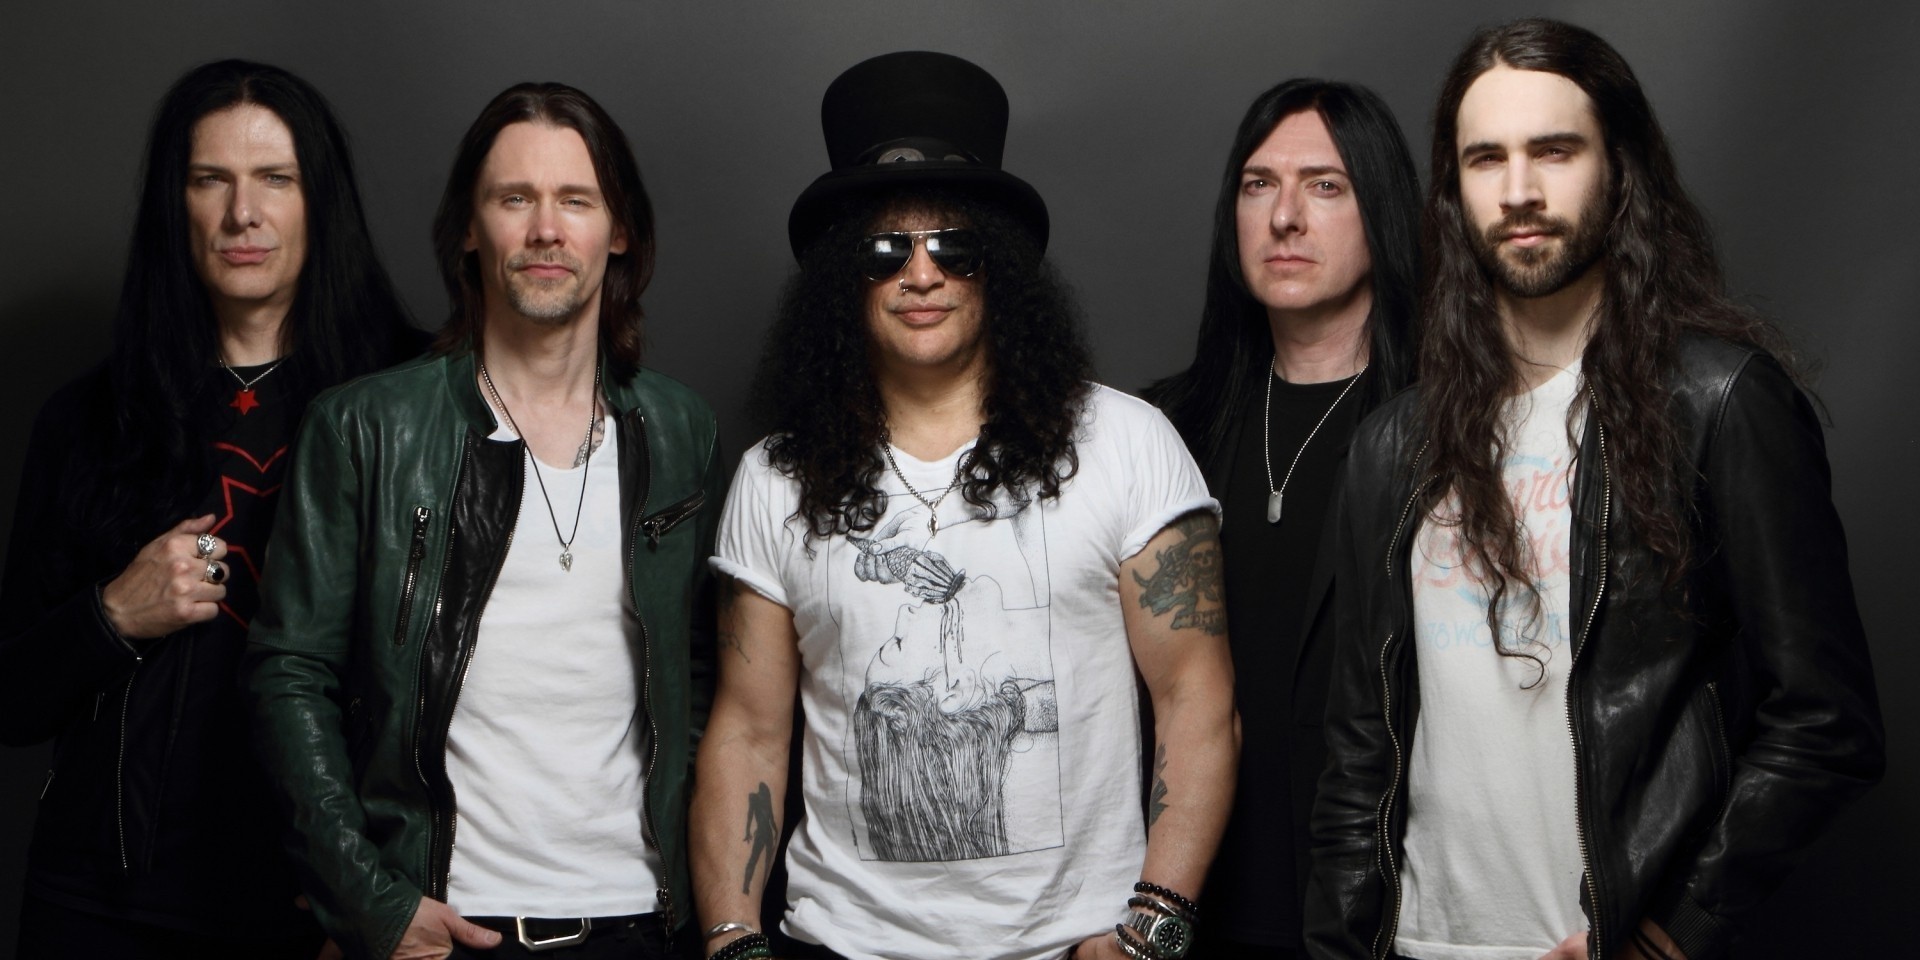 BREAKING: Slash featuring Myles Kennedy and The Conspirators to perform in Singapore in January 2019